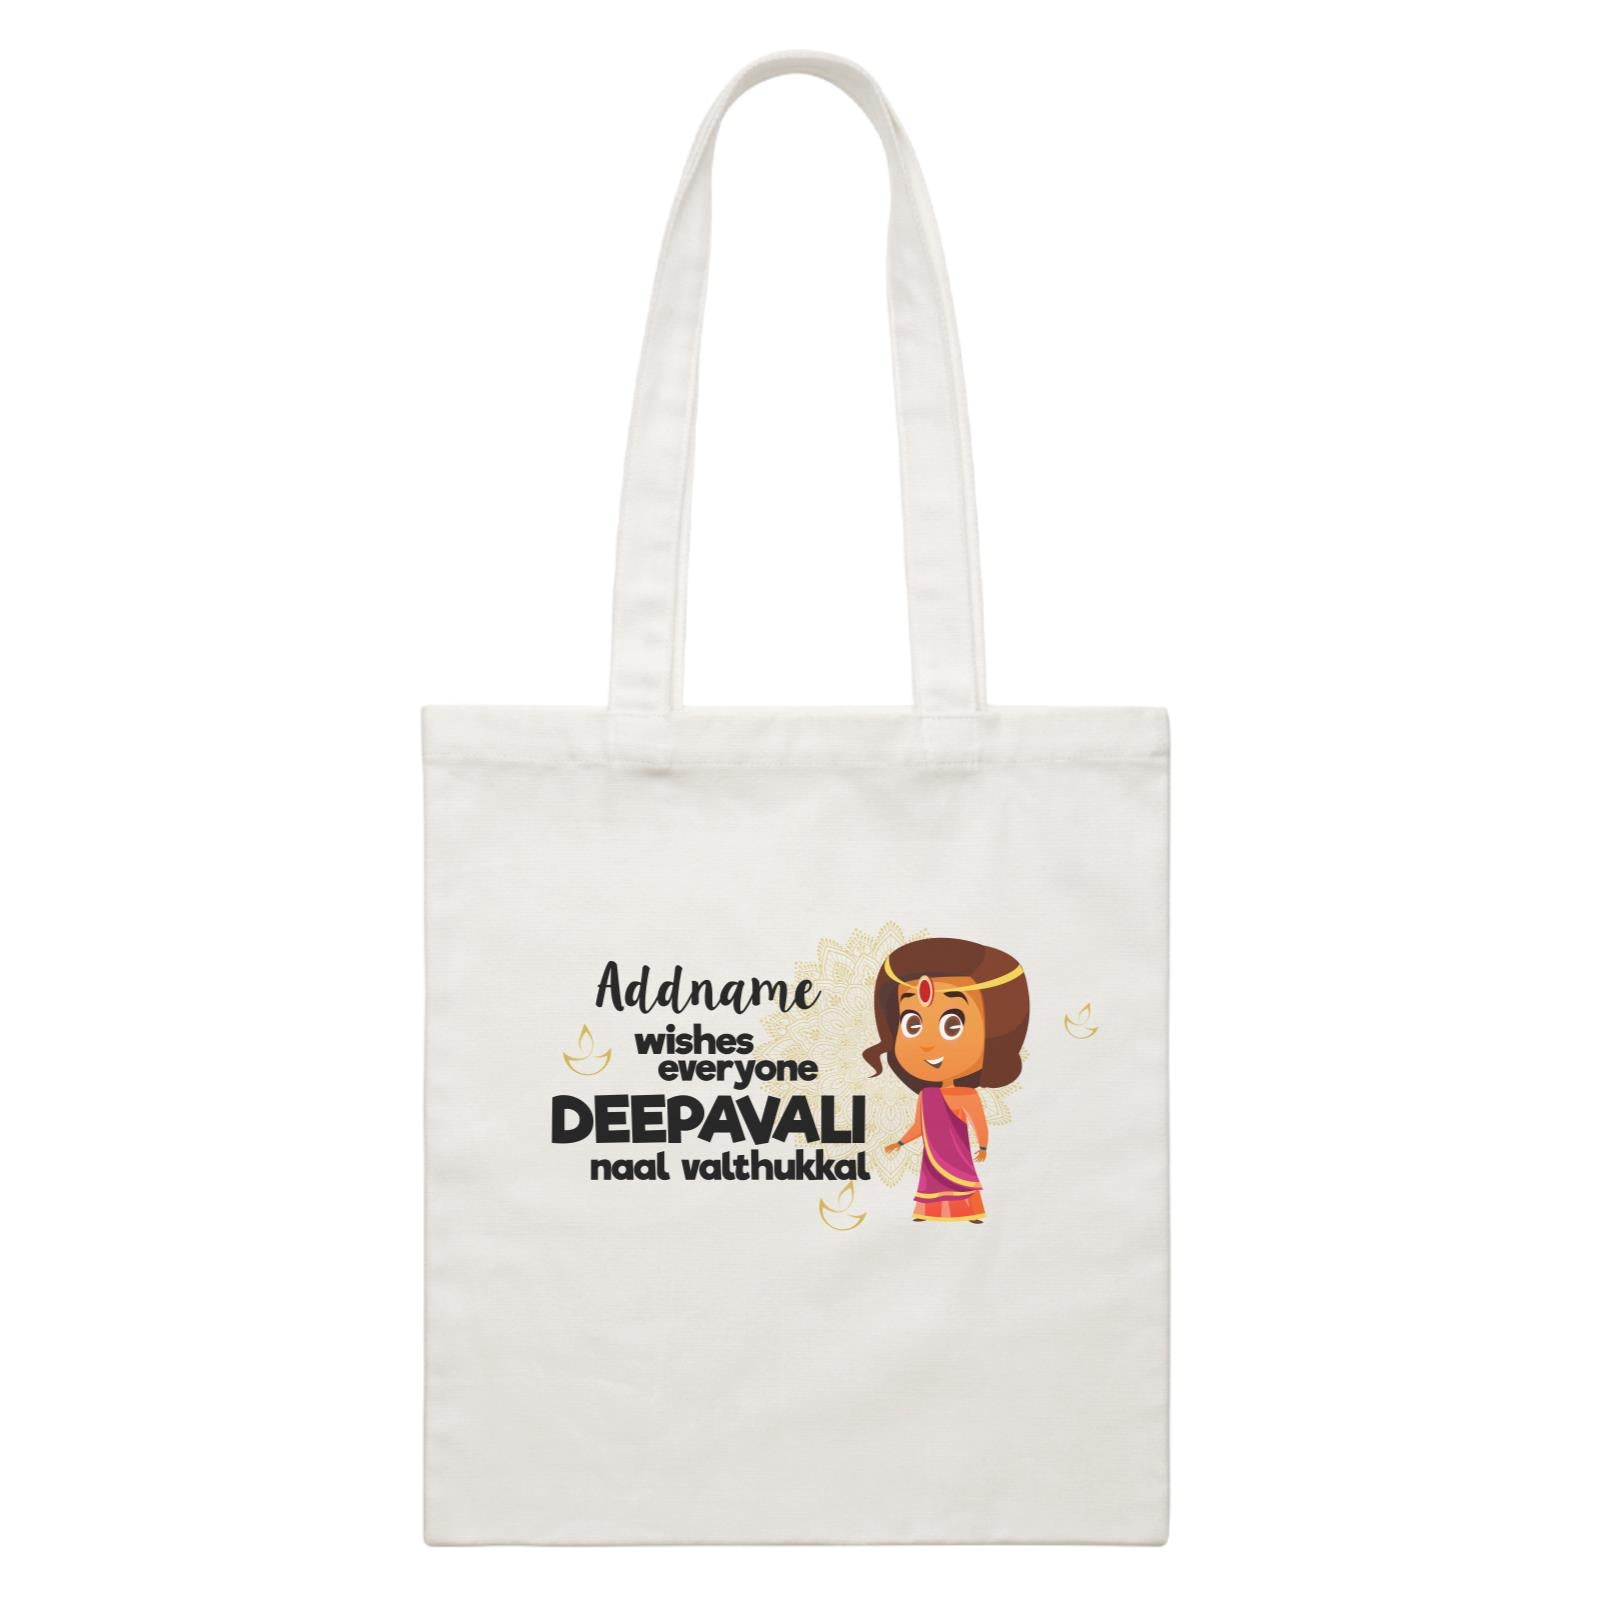 Cute Girl Wishes Everyone Deepavali Addname White Canvas Bag